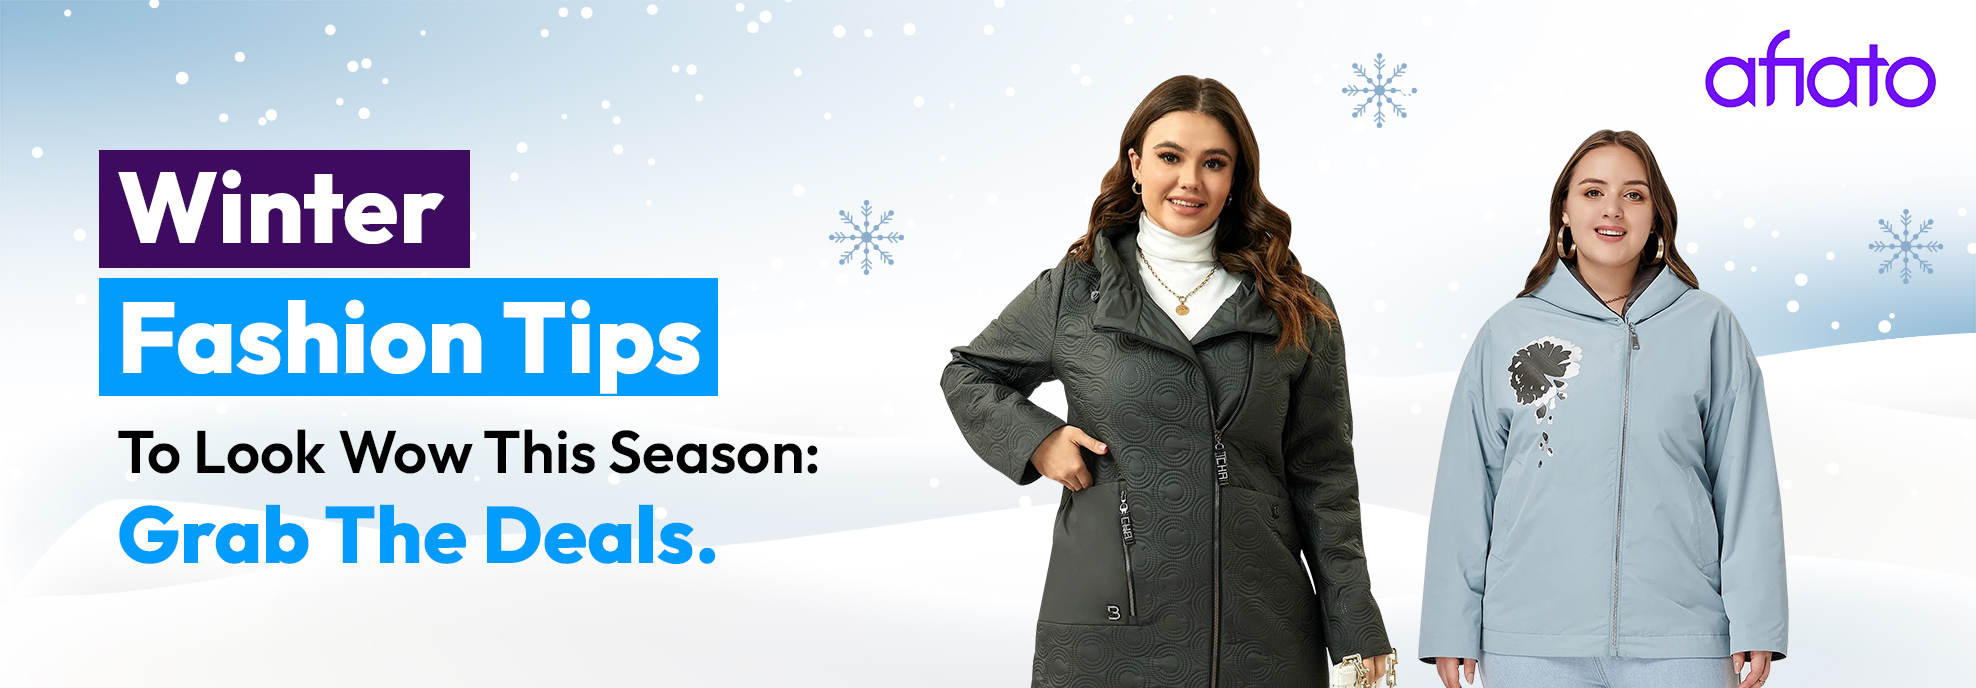 Winter Fashion Tips to Look Wow This Season Grab the Deals